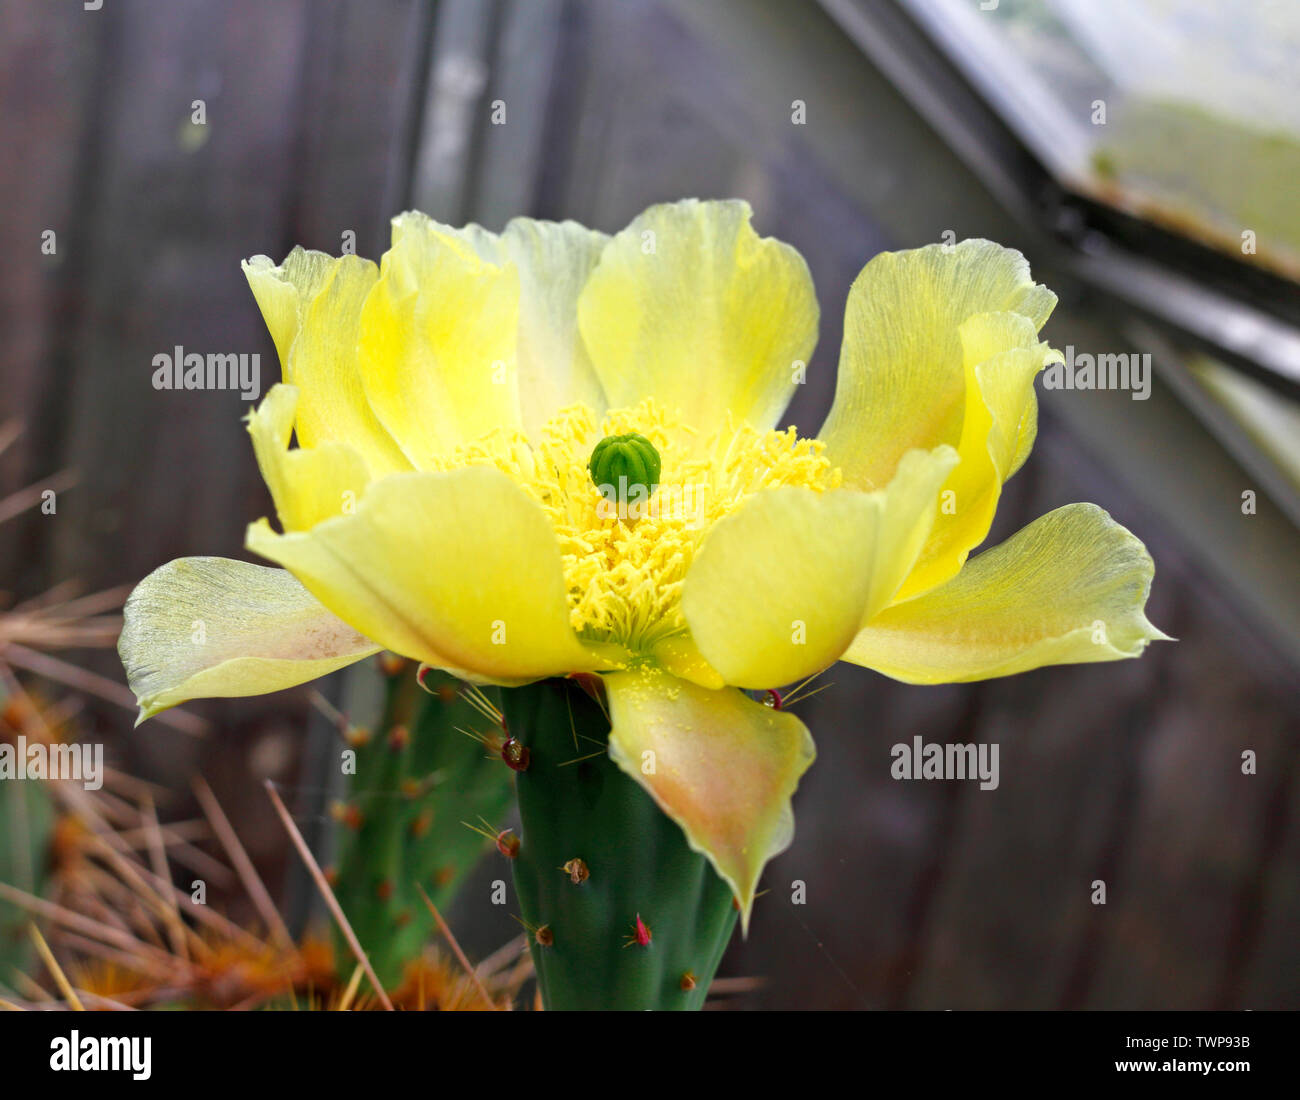 A view of the flower of the Texas Prickly Pear, Opuntia aciculate, in a garden greenhouse at Hellesdon, Norfolk, England, United Kingdom, Europe. Stock Photo